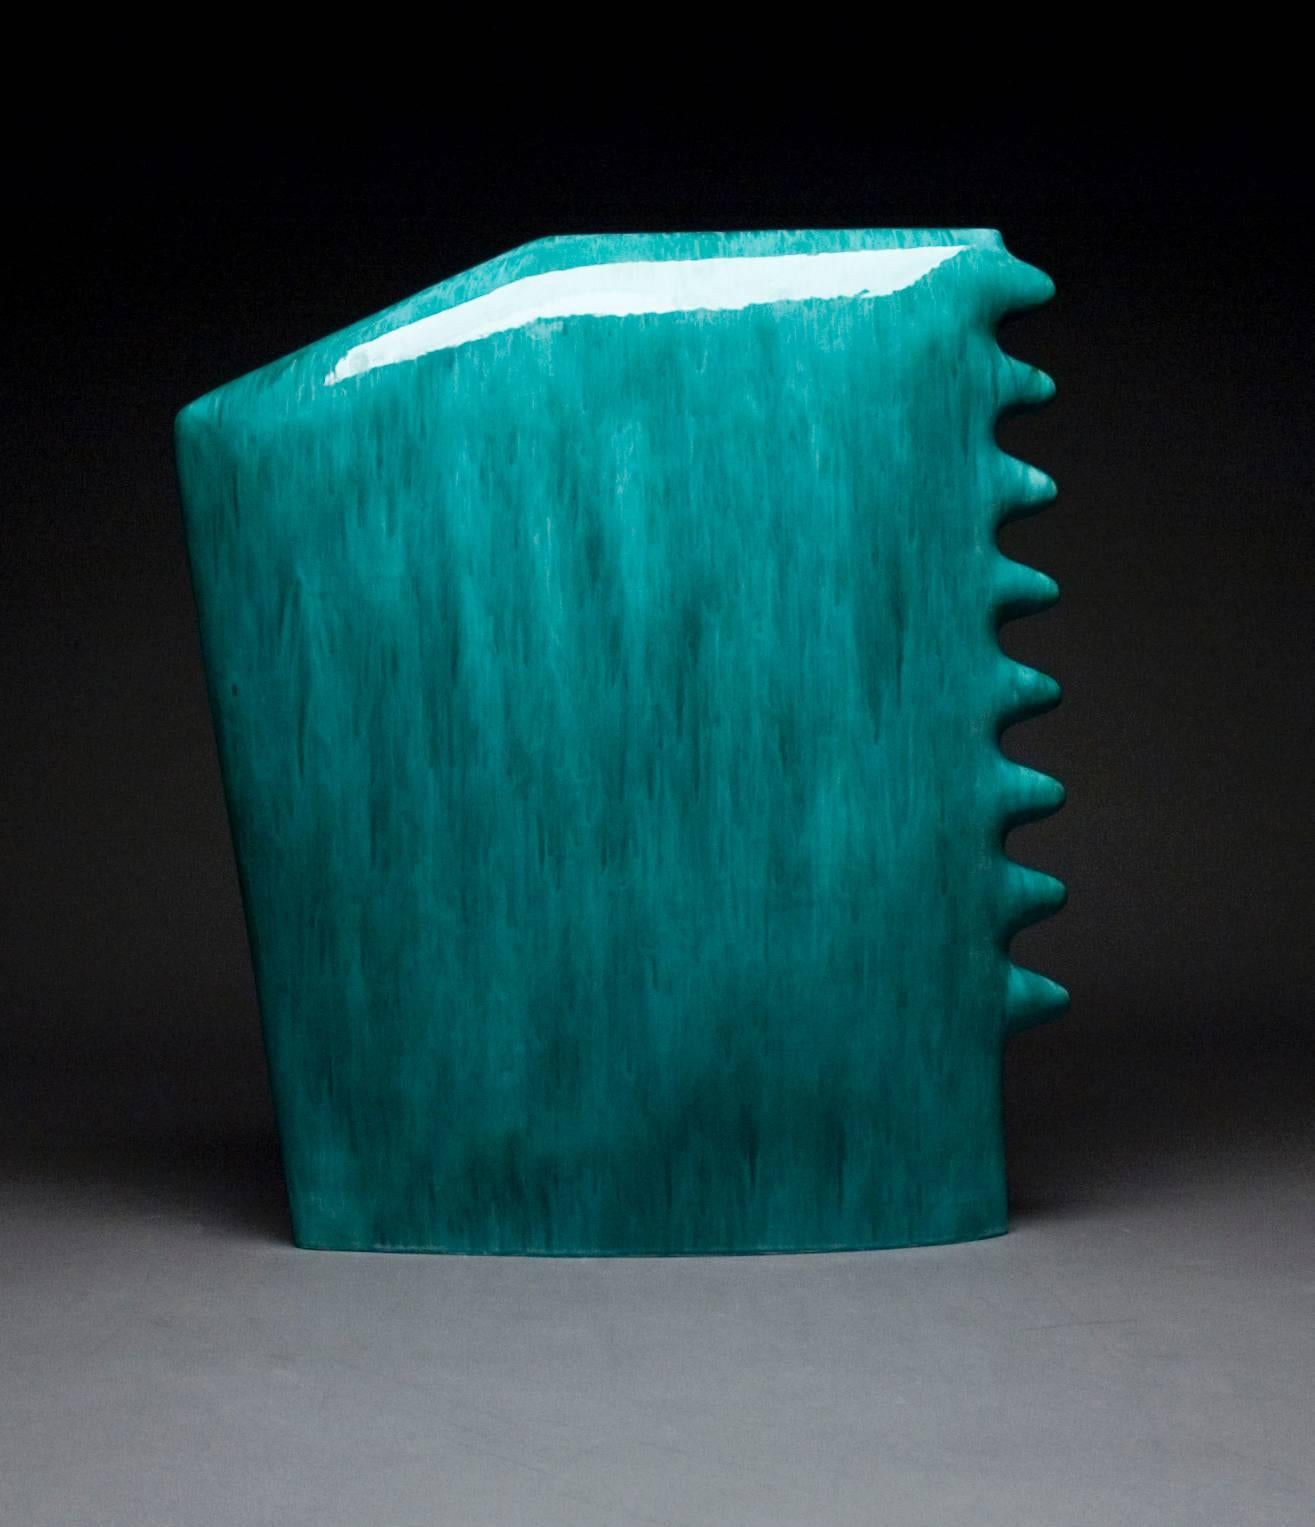 James Marshall Abstract Sculpture - "Blue 270", Contemporary, Ceramic, Minimalist, Abstract, Sculpture, Glaze